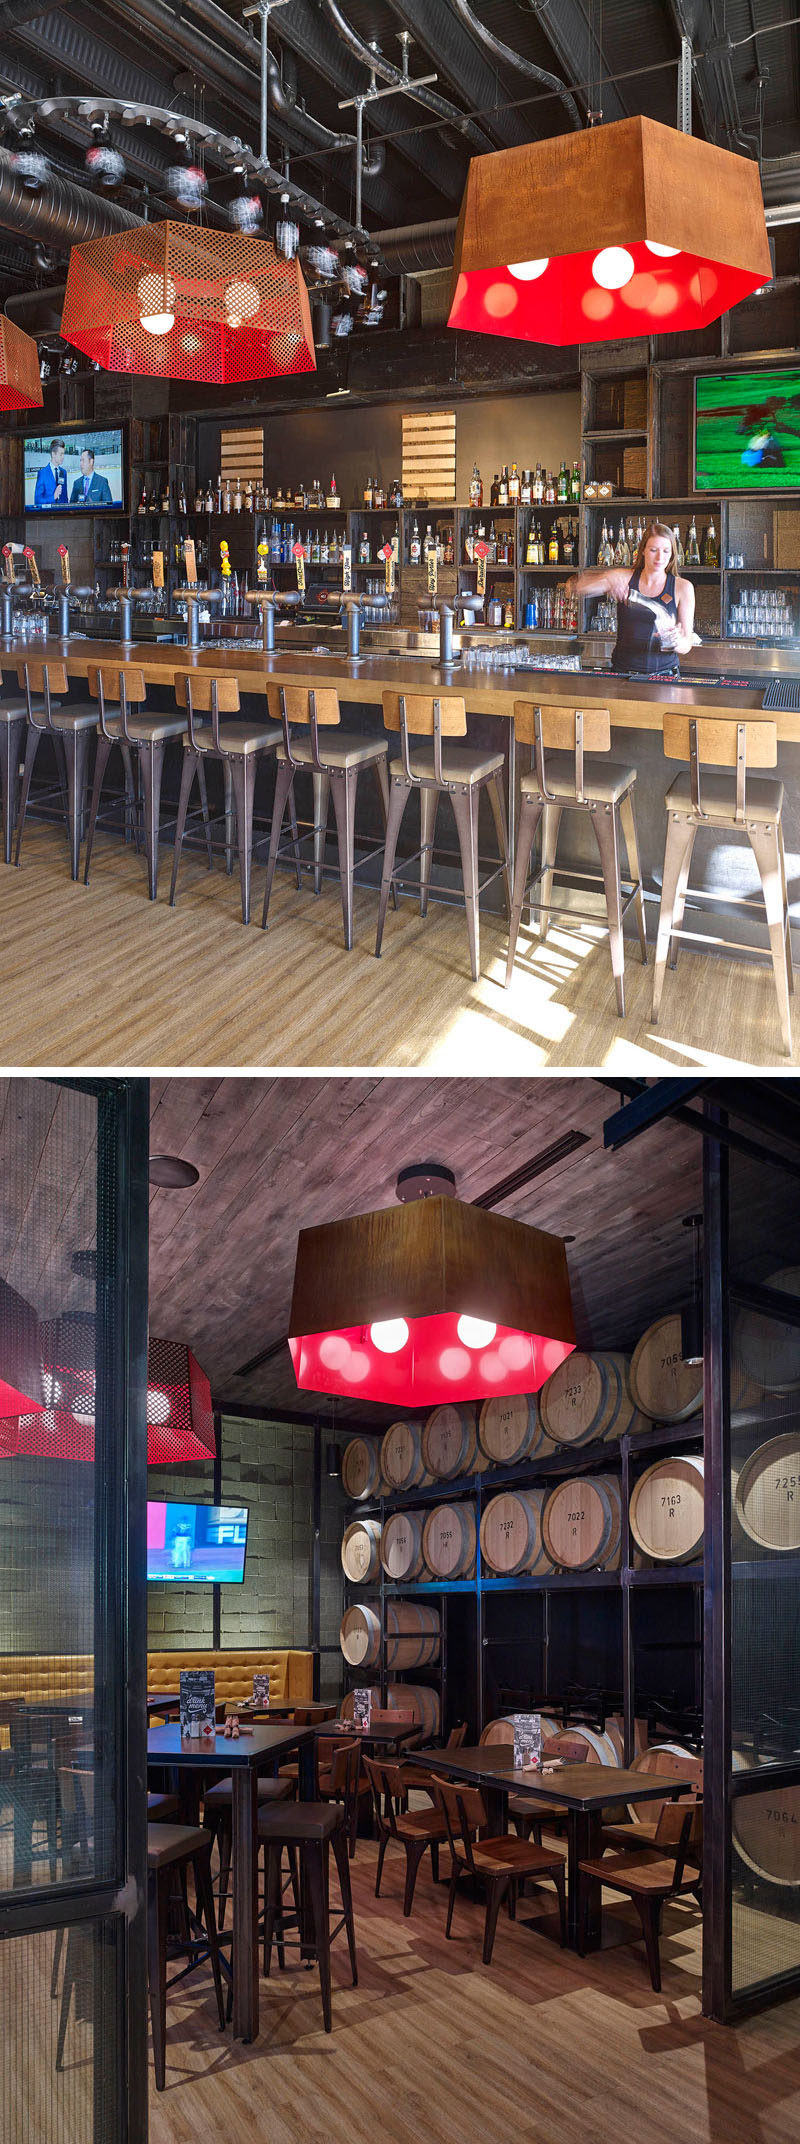 This industrial brew pub features a casual dining area as well as a large bar area both with large copper lights above them. The use of pipes in place of more traditional looking beer taps, together with wooden elements create an industrial look throughout the space.